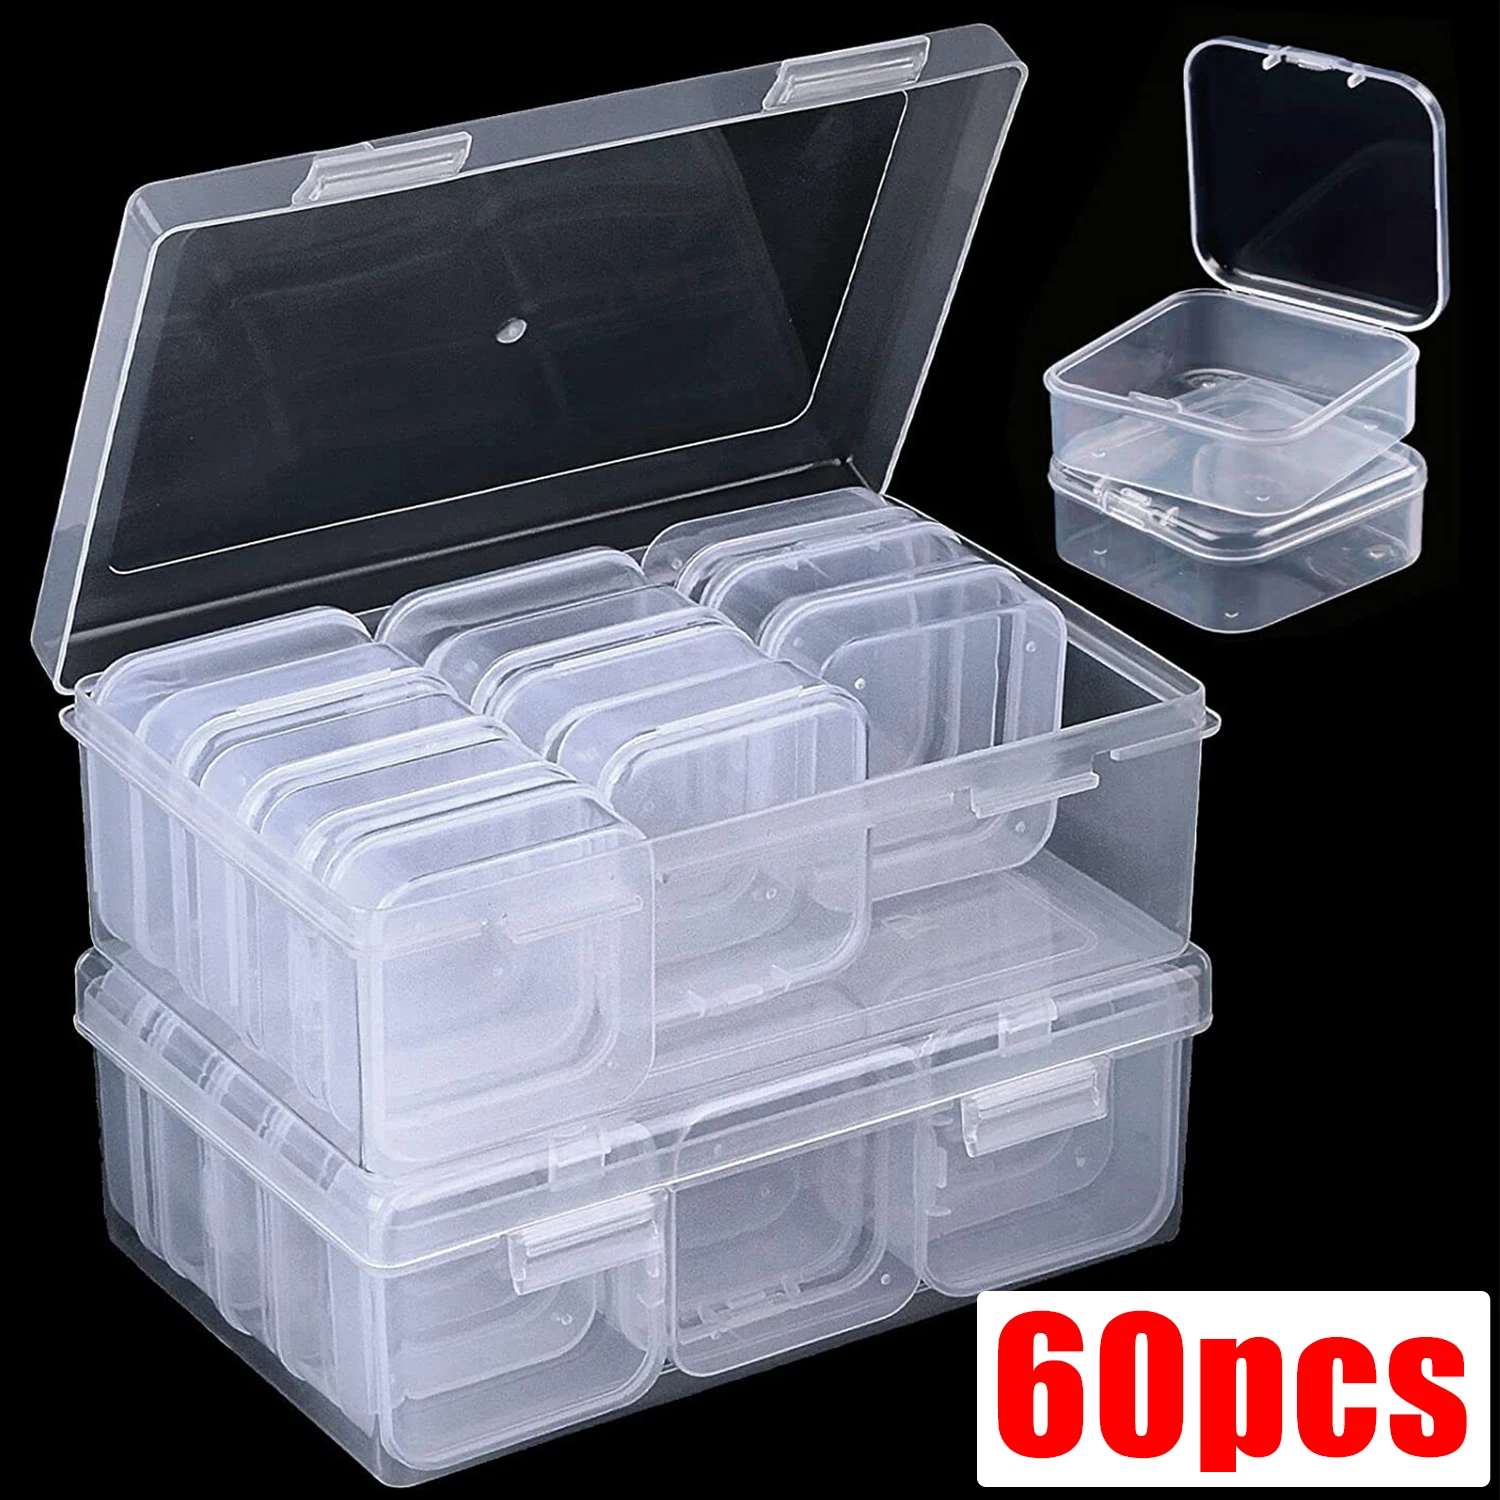 60 Packs Clear Small Plastic Containers Transparent Storage Box with Hinged Lid for Items Crafts Jewelry Package Clear Cases secret key тонер для лица с экстрактом гамамелиса with hazel pore clear toner 248